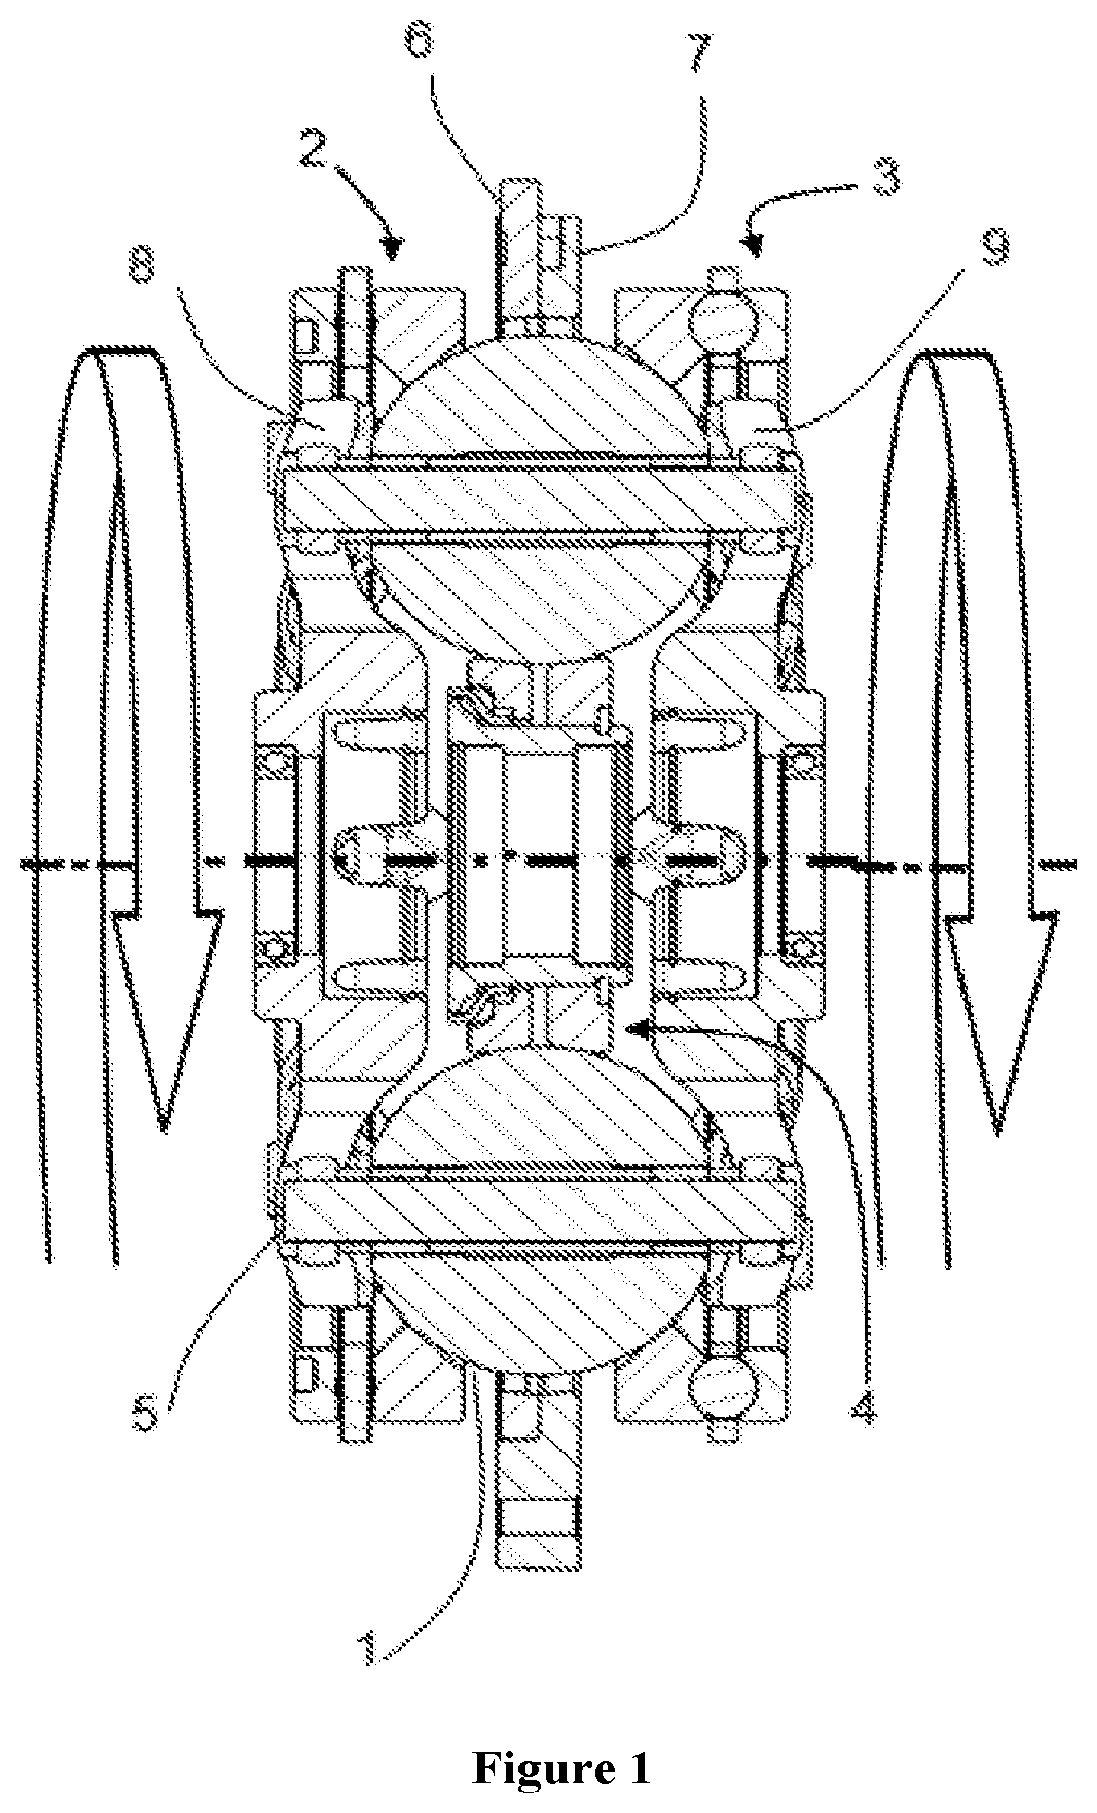 Hybrid electric powertrain configurations with a ball variator used as a continuously variable mechanical transmission